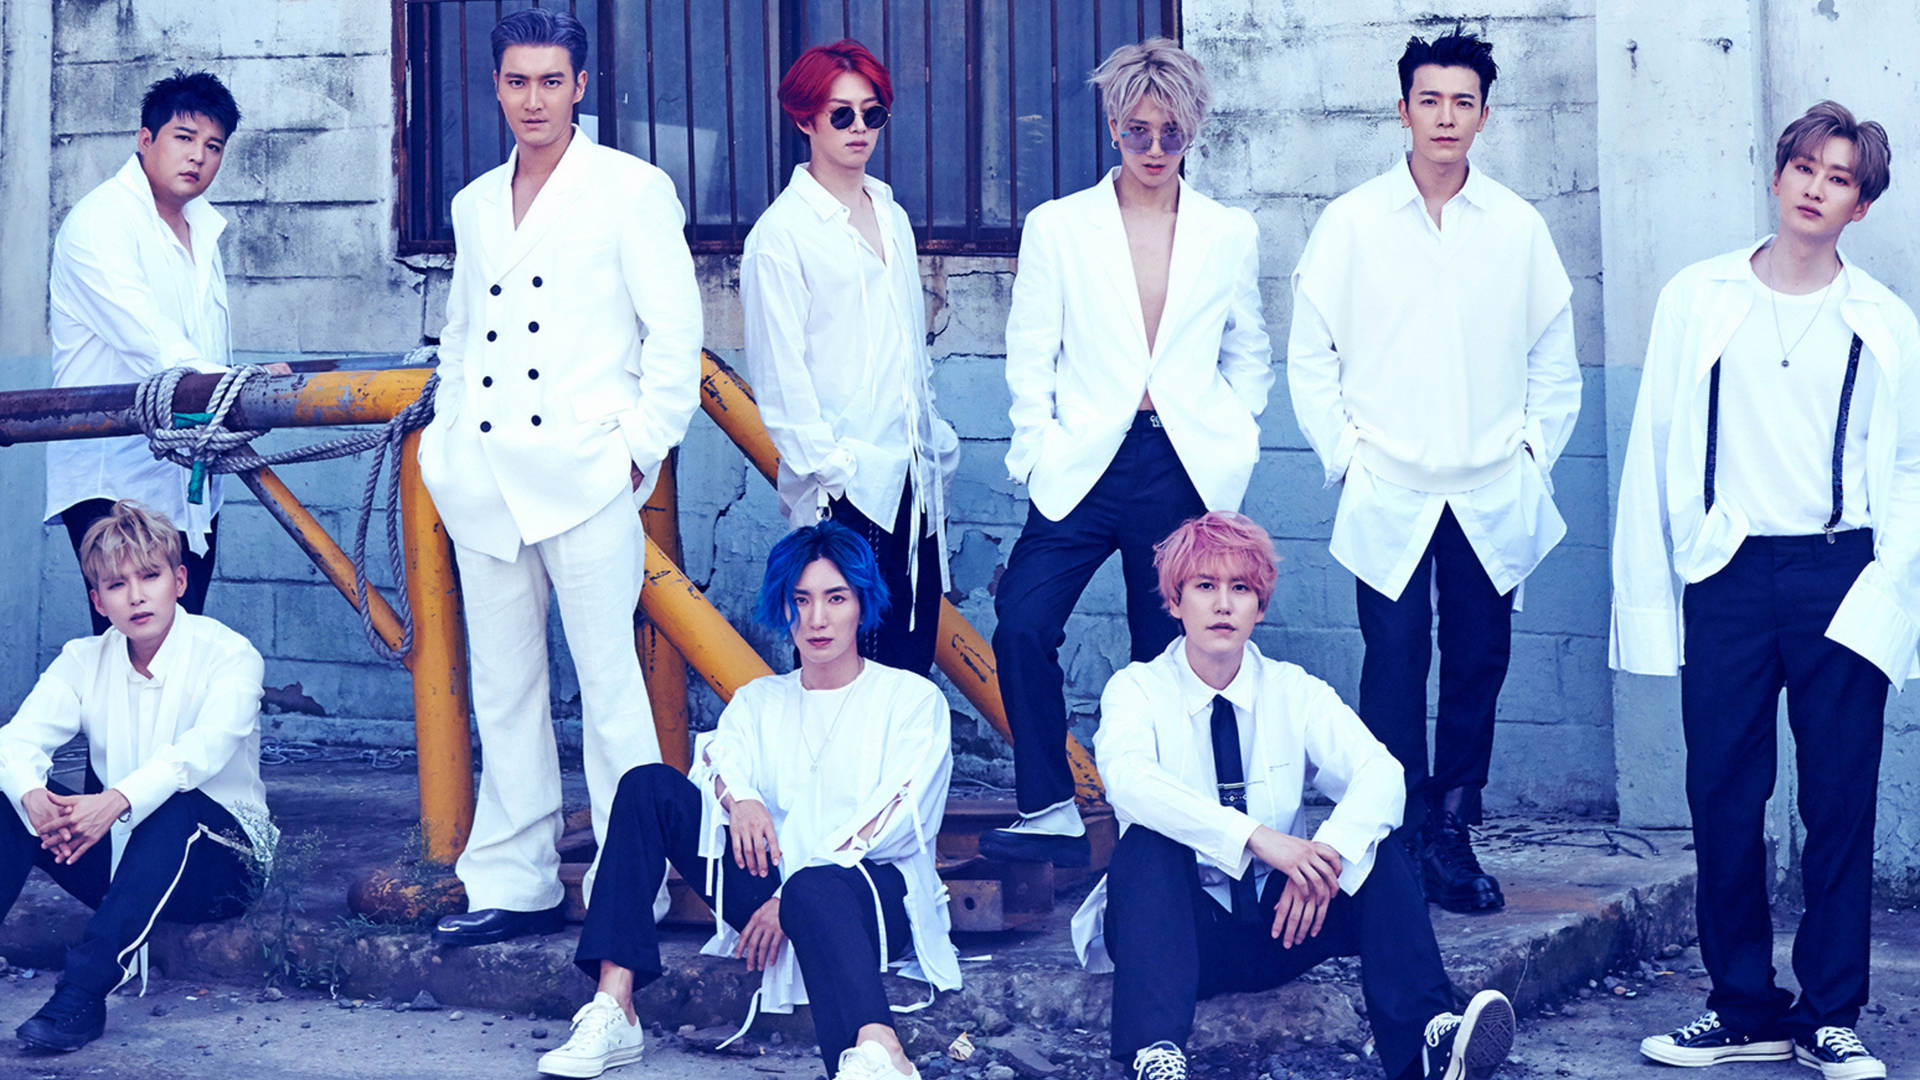 Super Junior In White Outfits